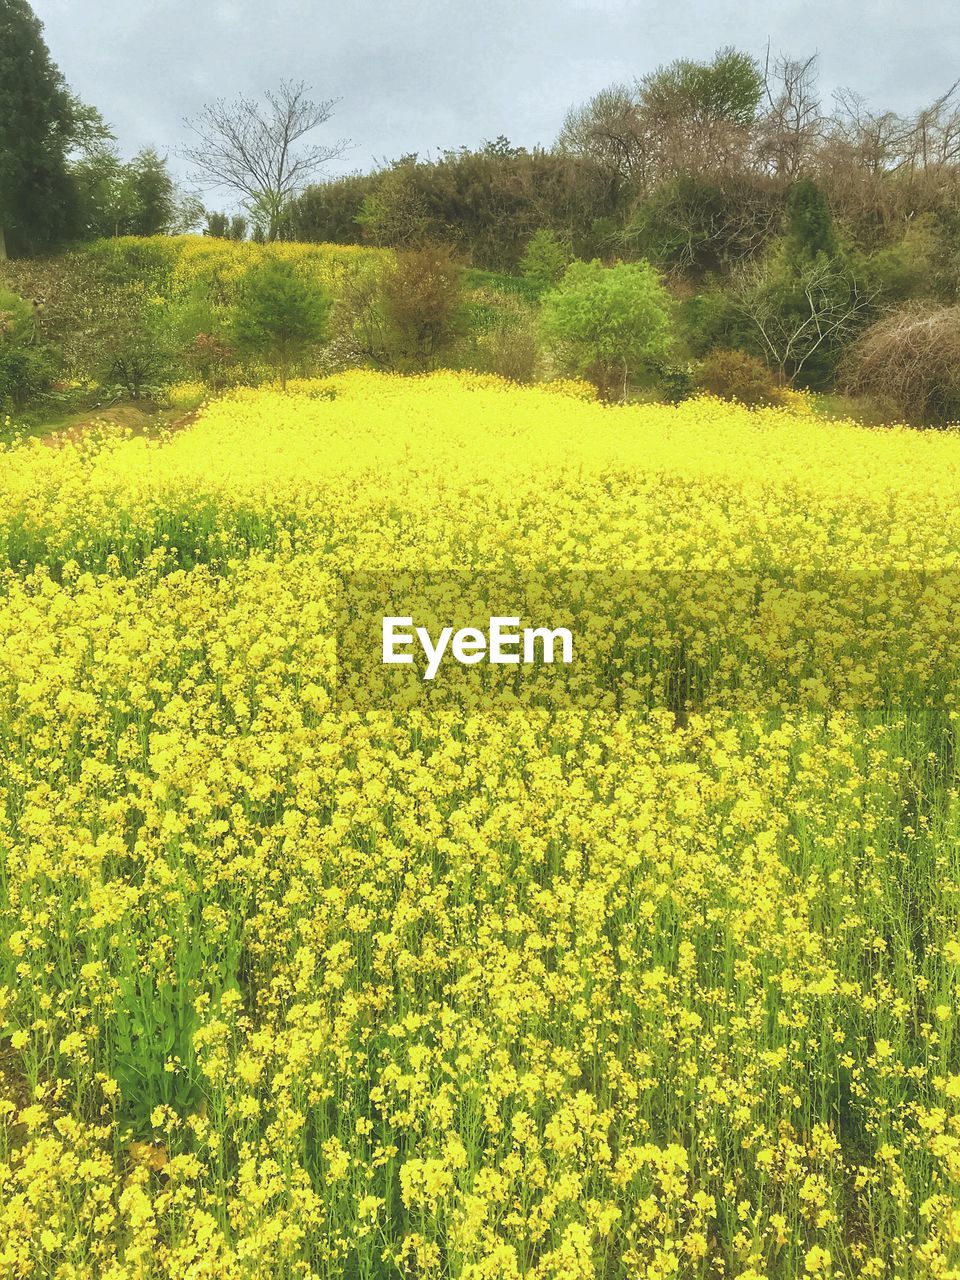 SCENIC VIEW OF FIELD AGAINST YELLOW FLOWERS